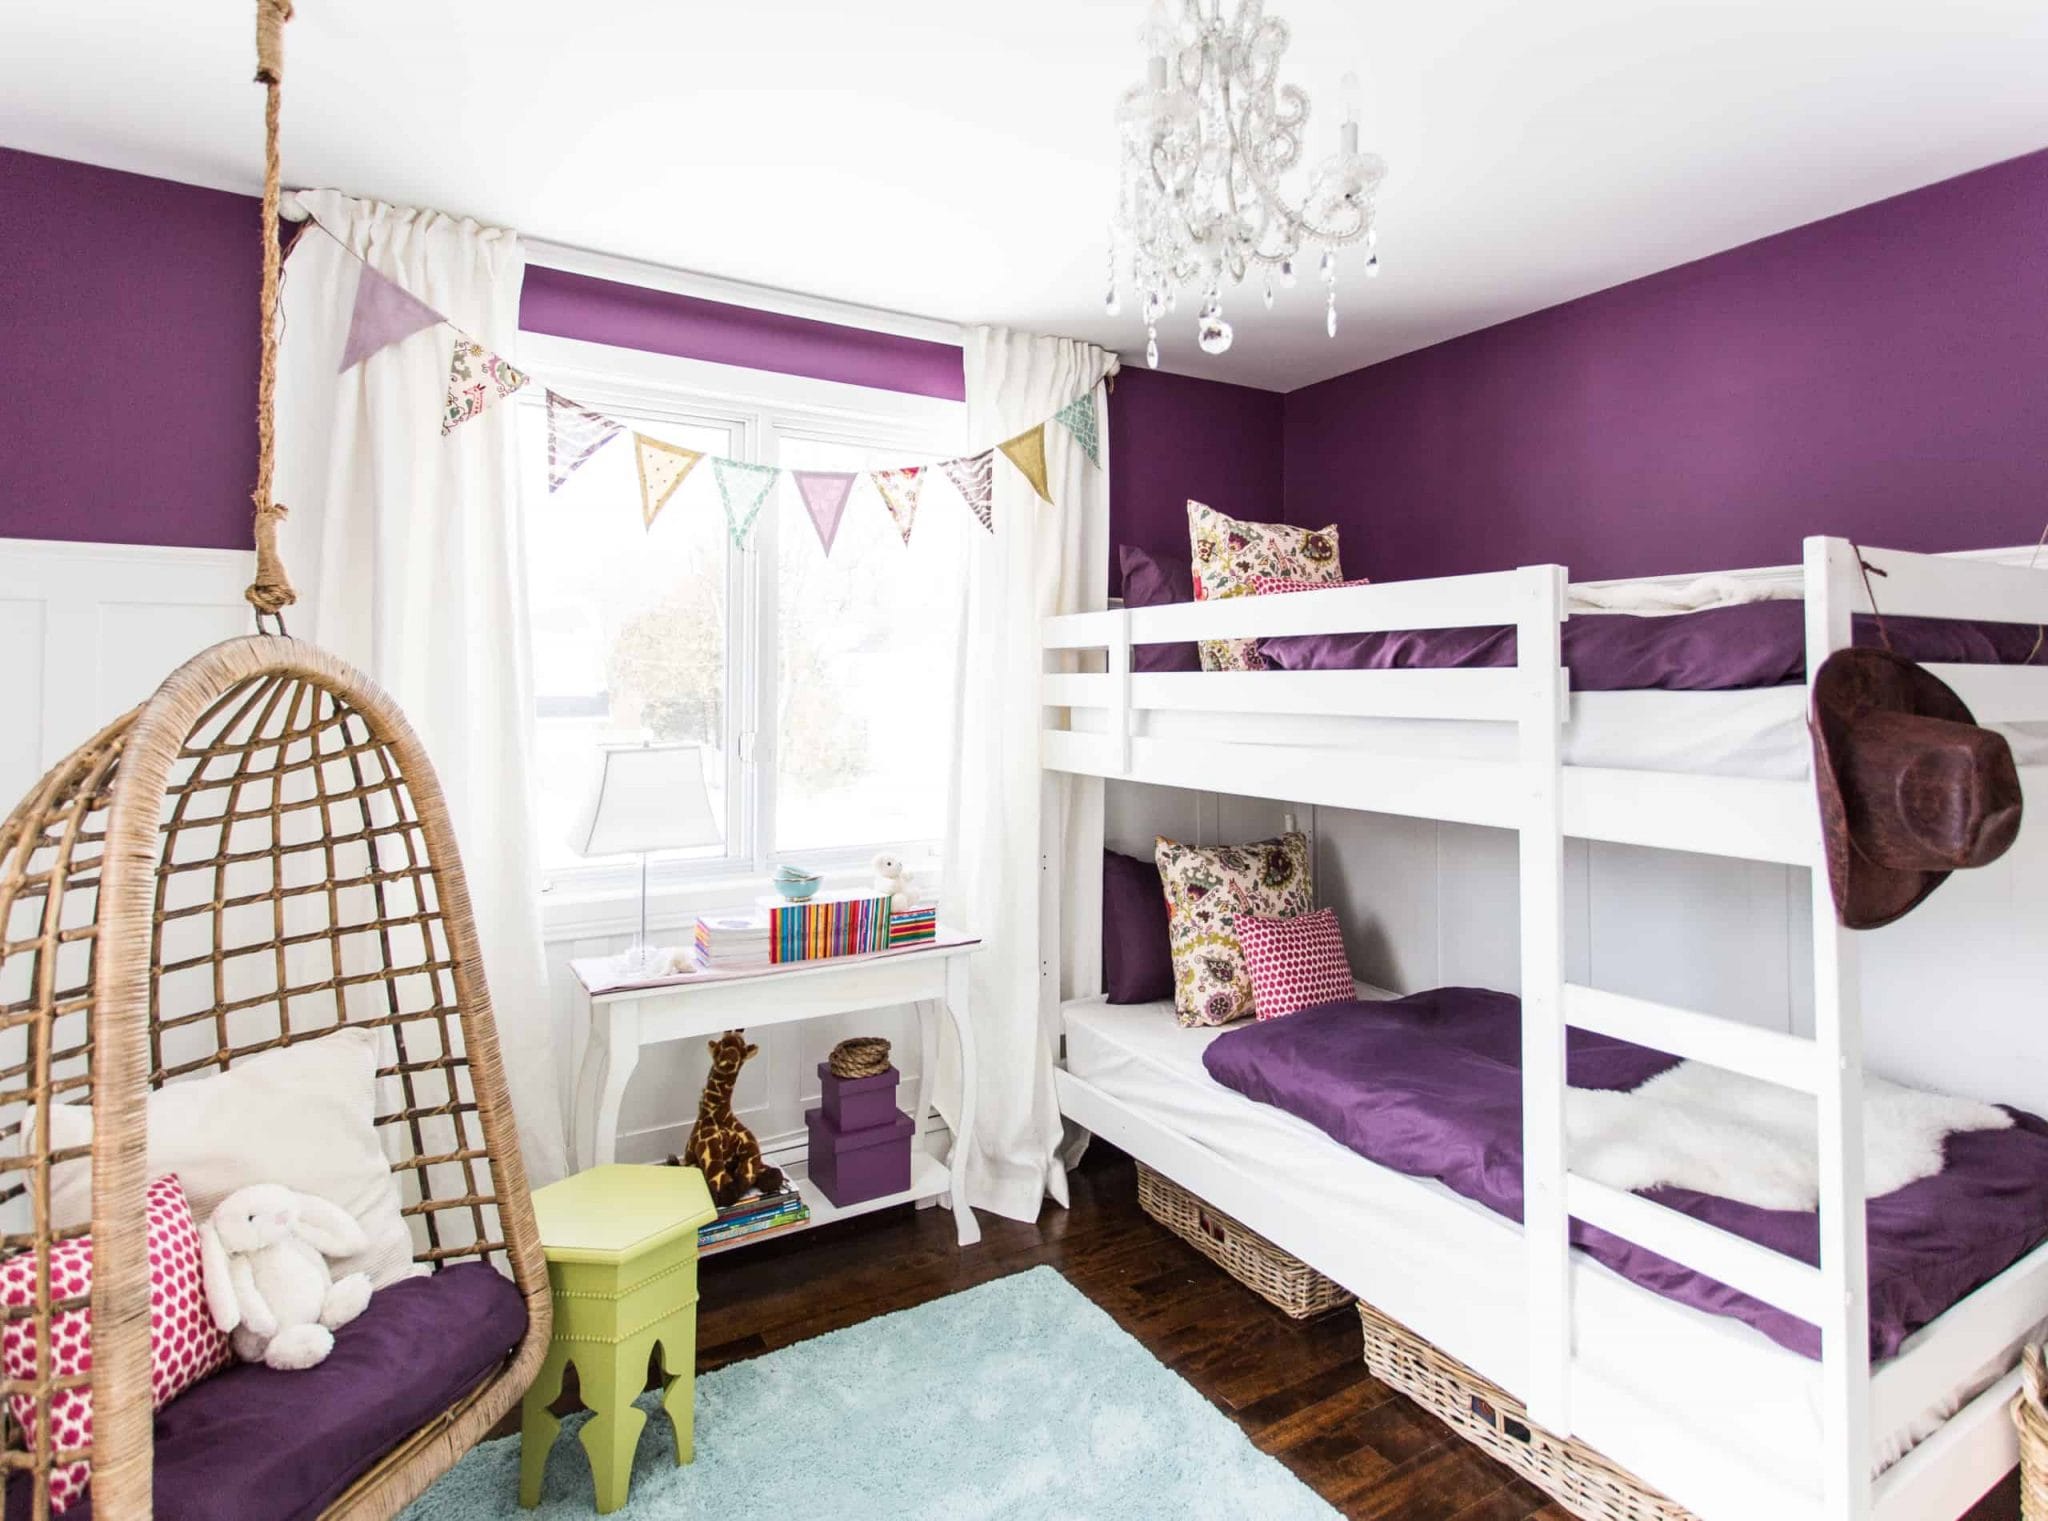 White and purple bunk beds inside a purple themed bedroom